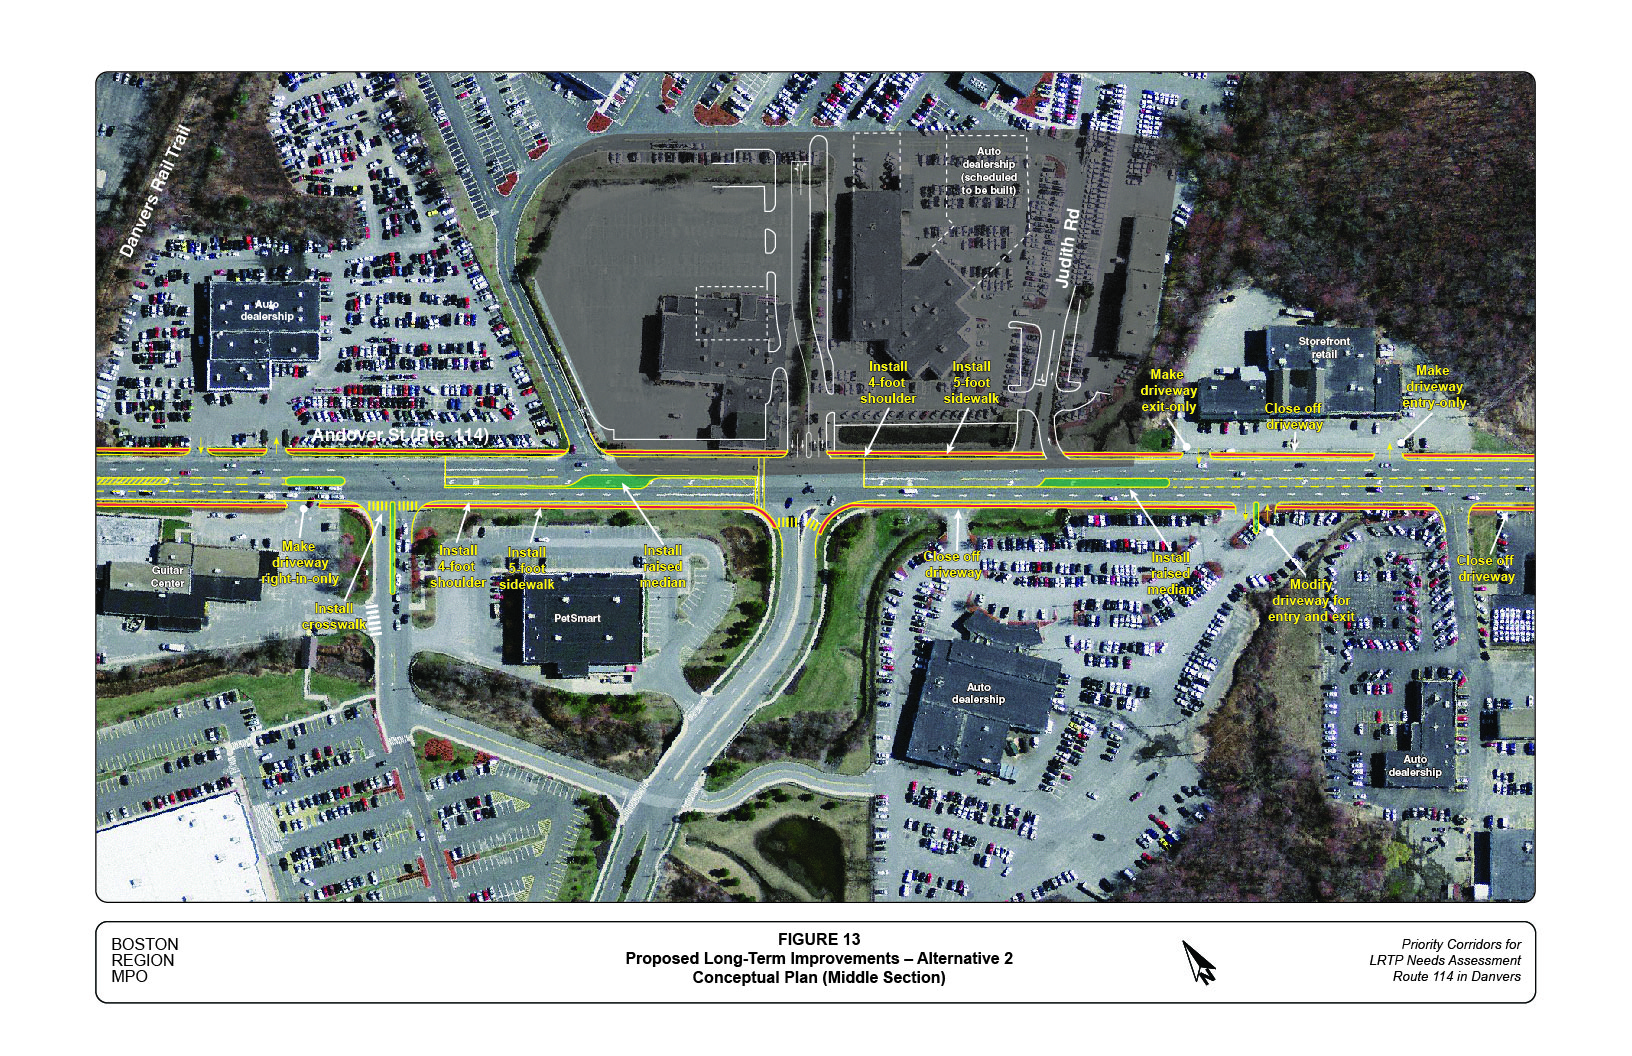 Figure 13 shows the locations and layouts of the proposed long-term improvements in Alternative 2 in the middle section of the study corridor.